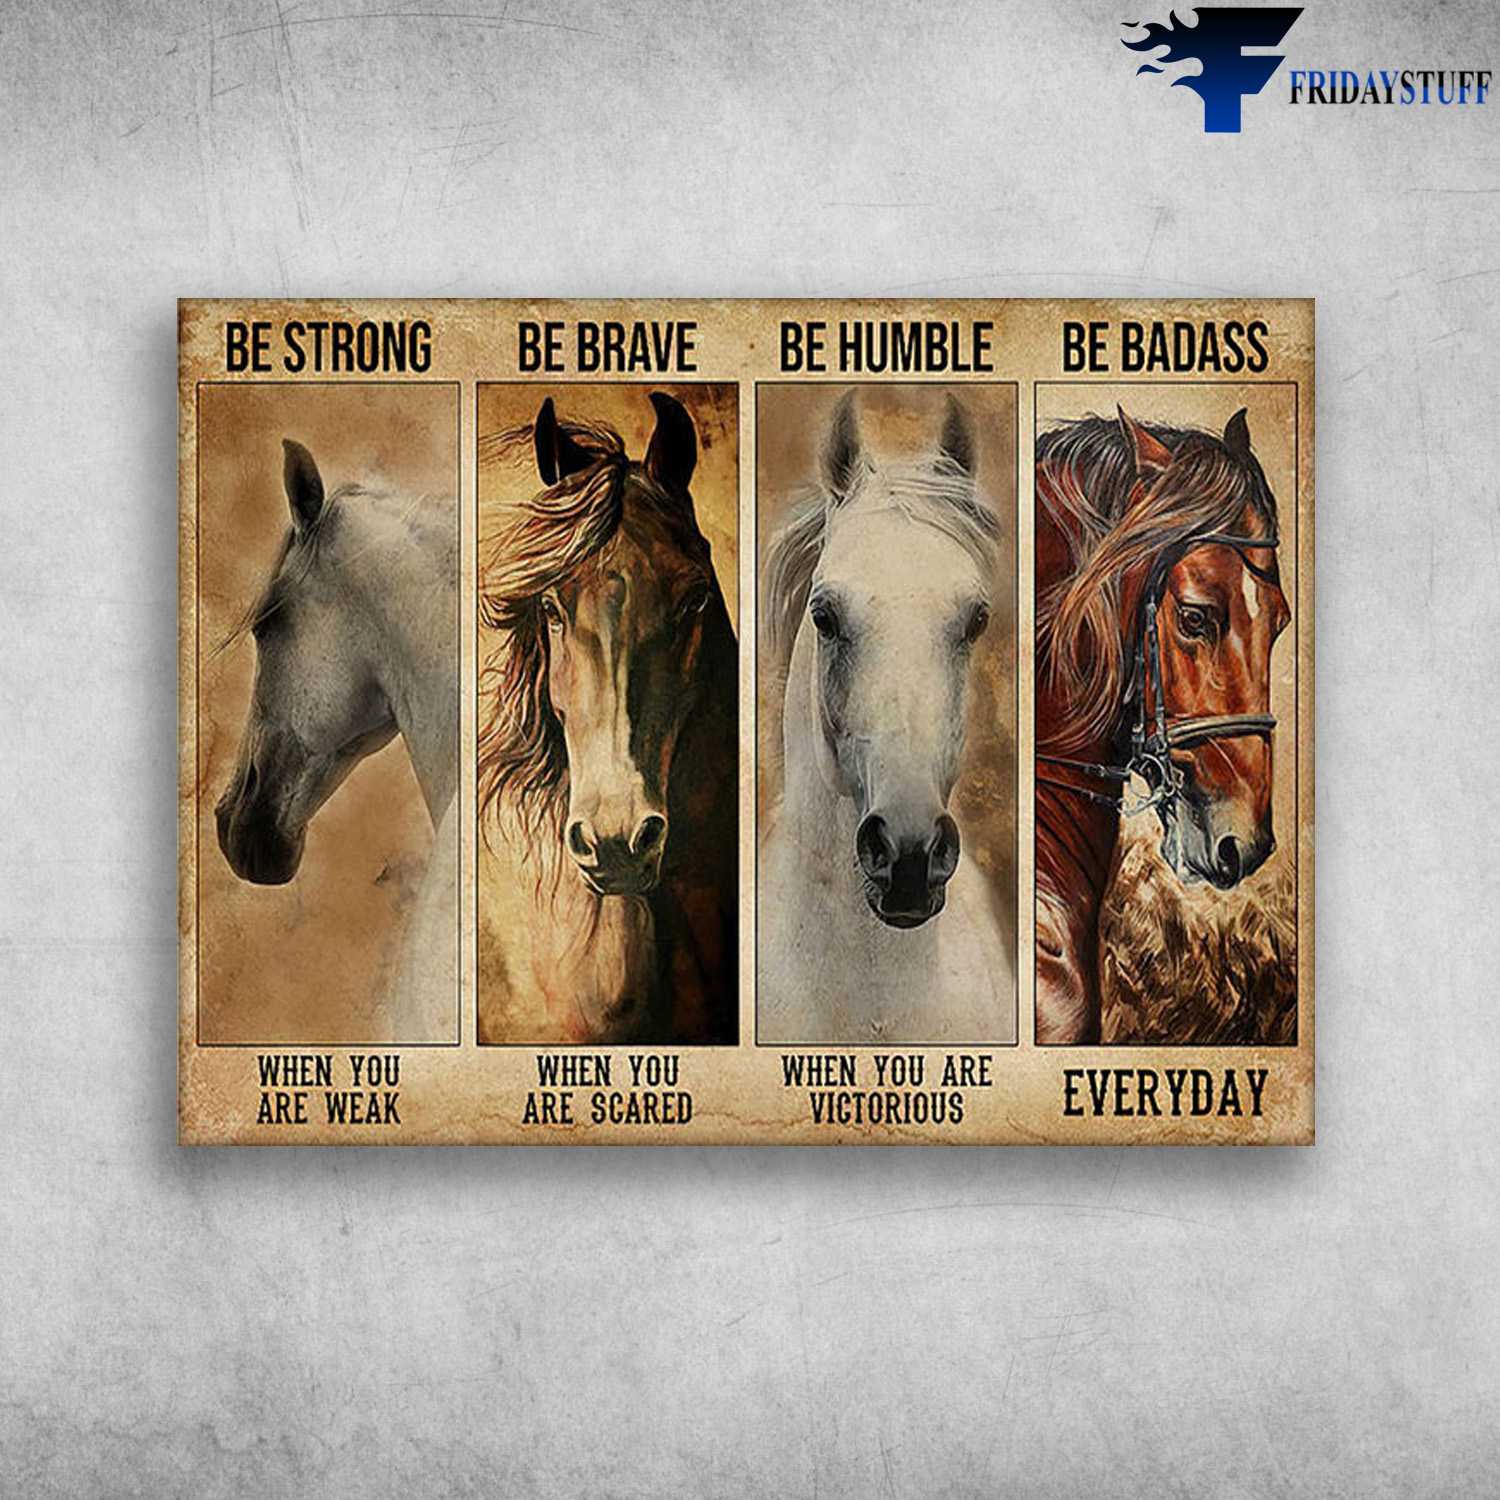 Horse Poster - Be Strong When You Are Weak, Be Brave When You Are Scared, Be Humble When You Are Victorious, Be Badass Everyday